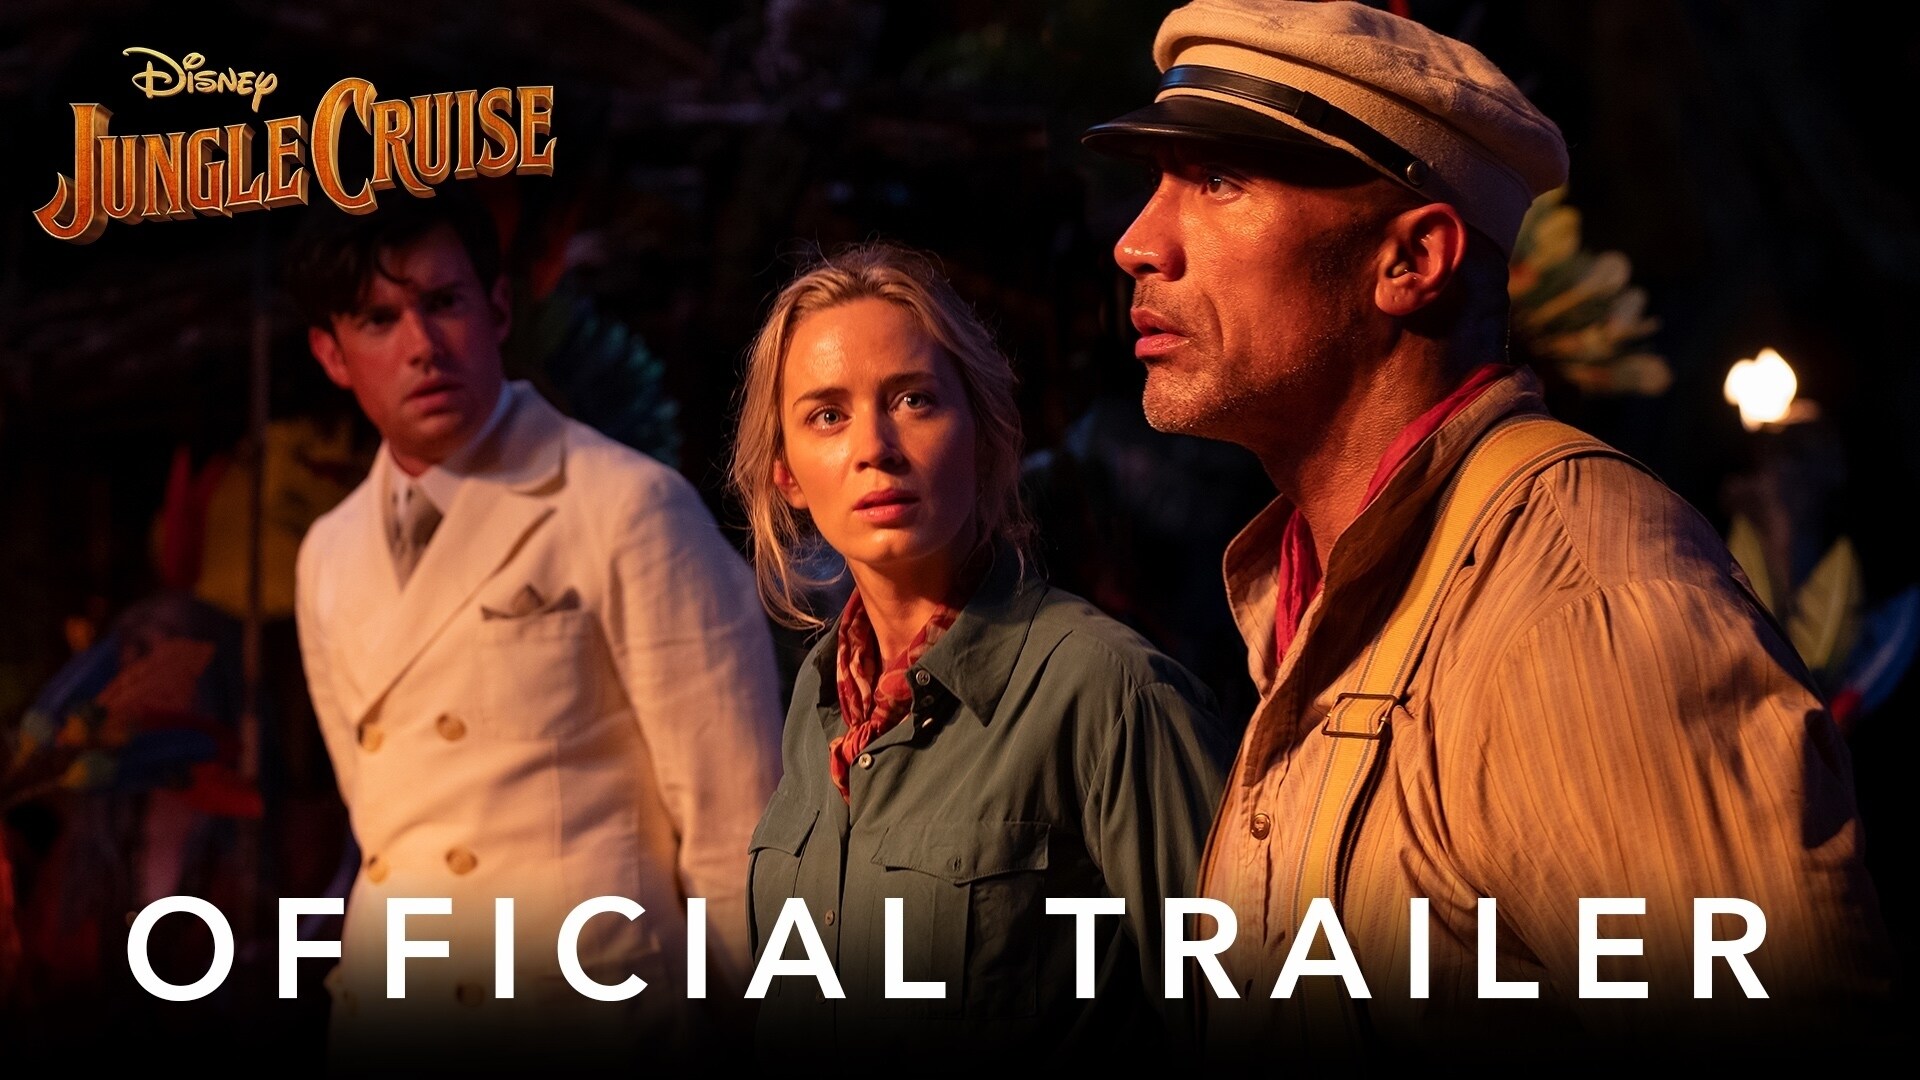 Jungle Cruise Trailer | In Theaters and on Disney+ with Premier Access July 30